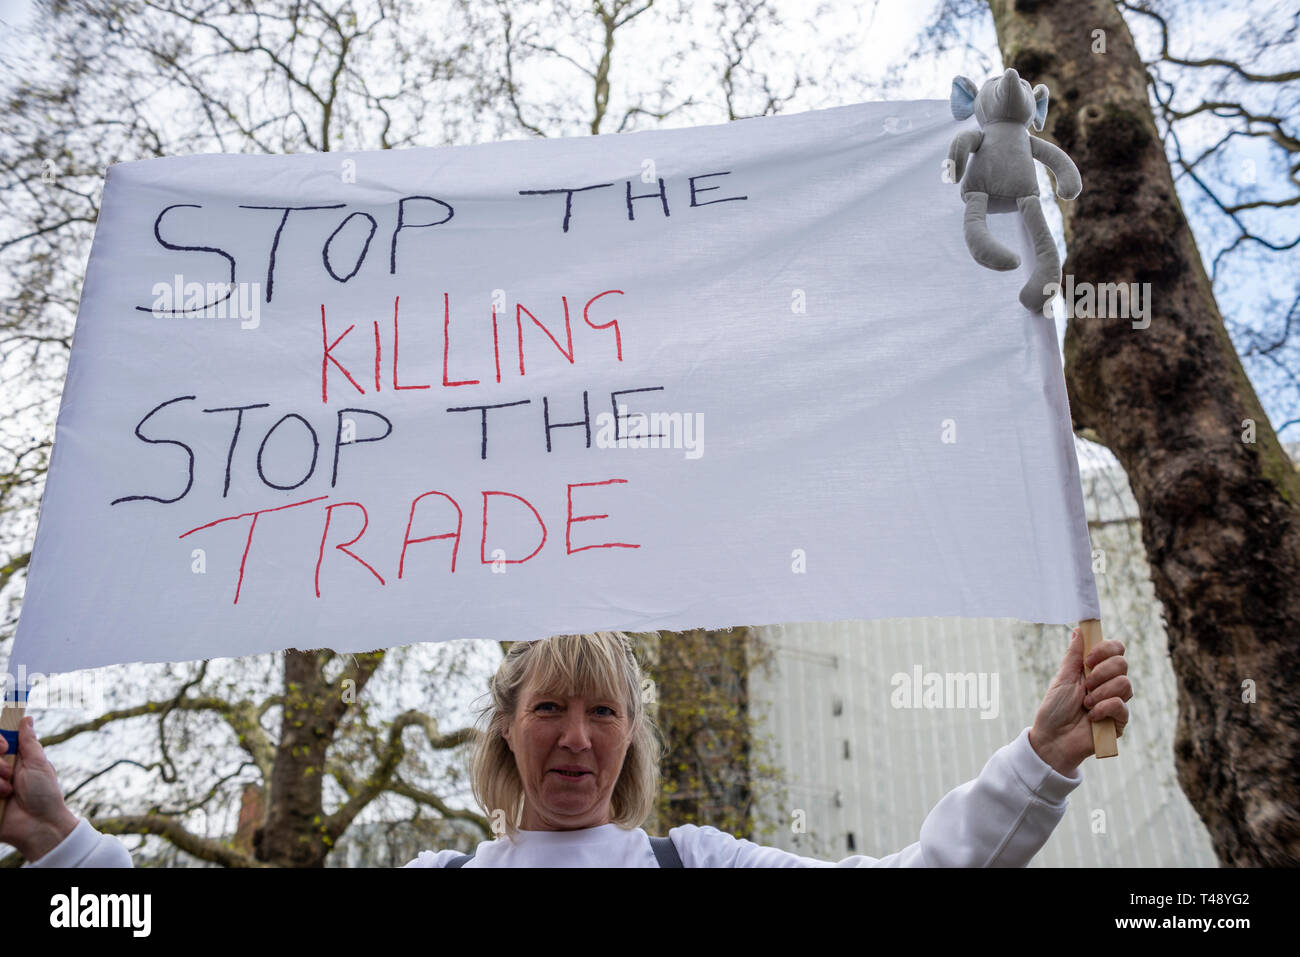 Protester at a stop trophy hunting and ivory trade protest rally, London, UK. Banner requesting stop the killing, stop the trade. Female Stock Photo